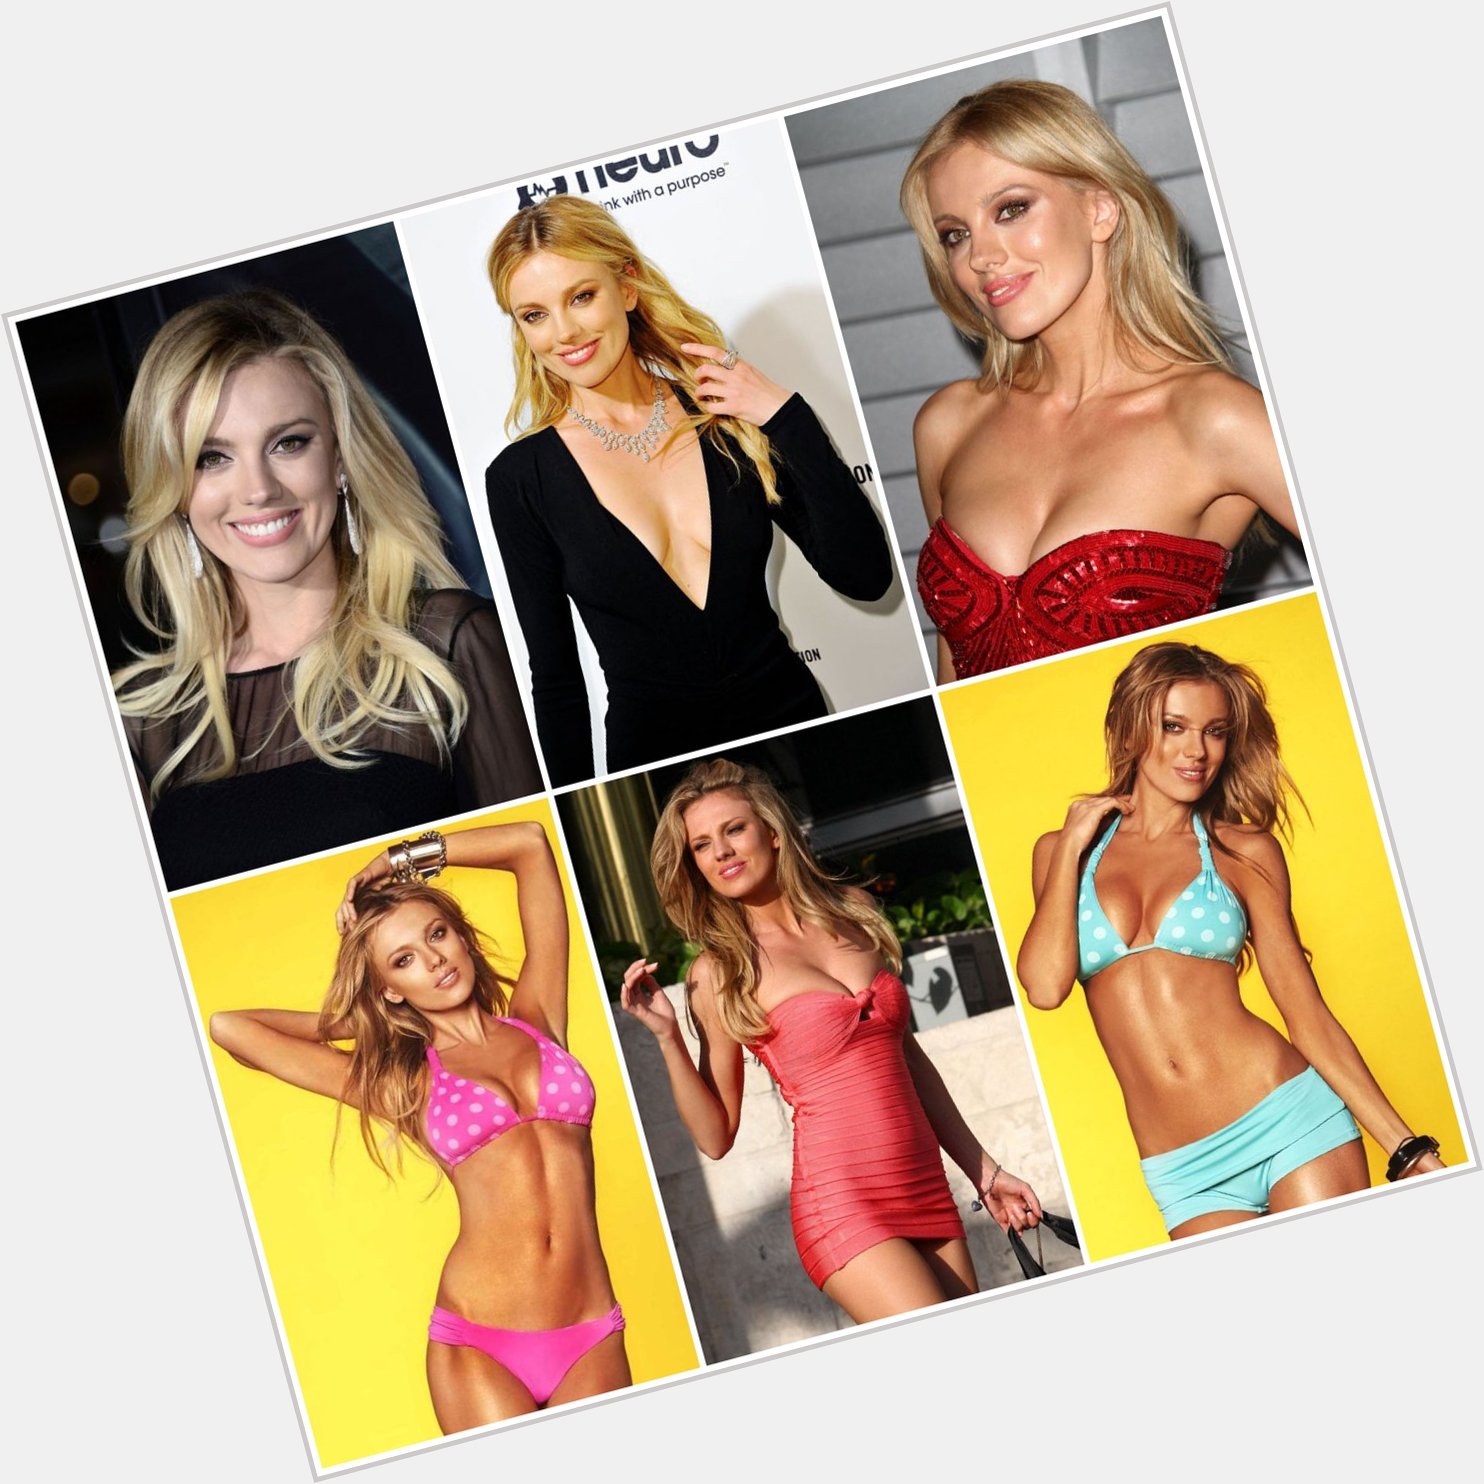 Happy Birthday Israeli-American actress and model Bar Paly, now 38 years old. 